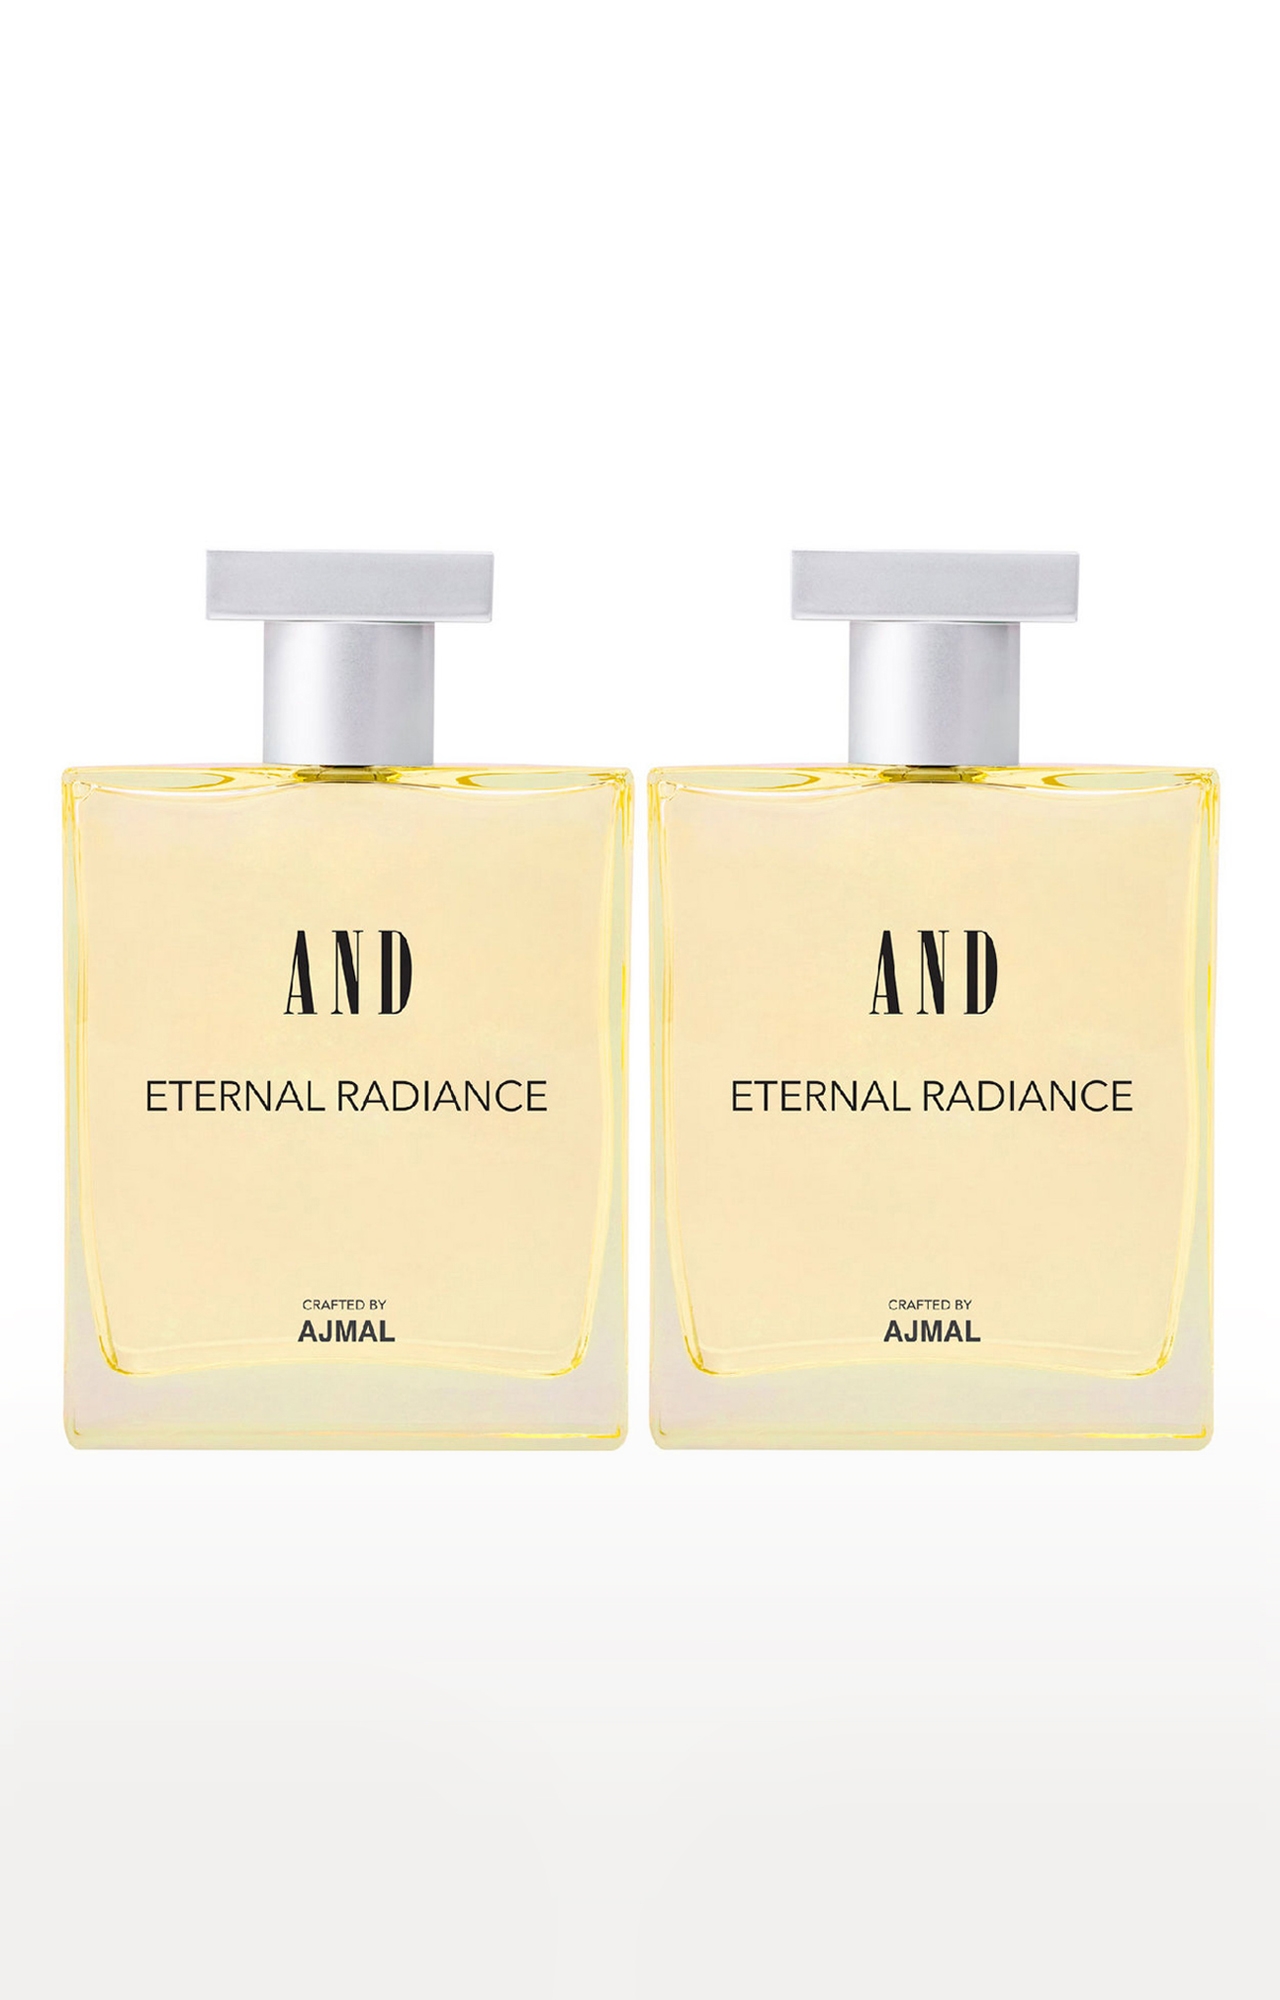 AND Eternal Radiance Pack of 2 Eau De Parfum 50ML each for Women Crafted by Ajmal 